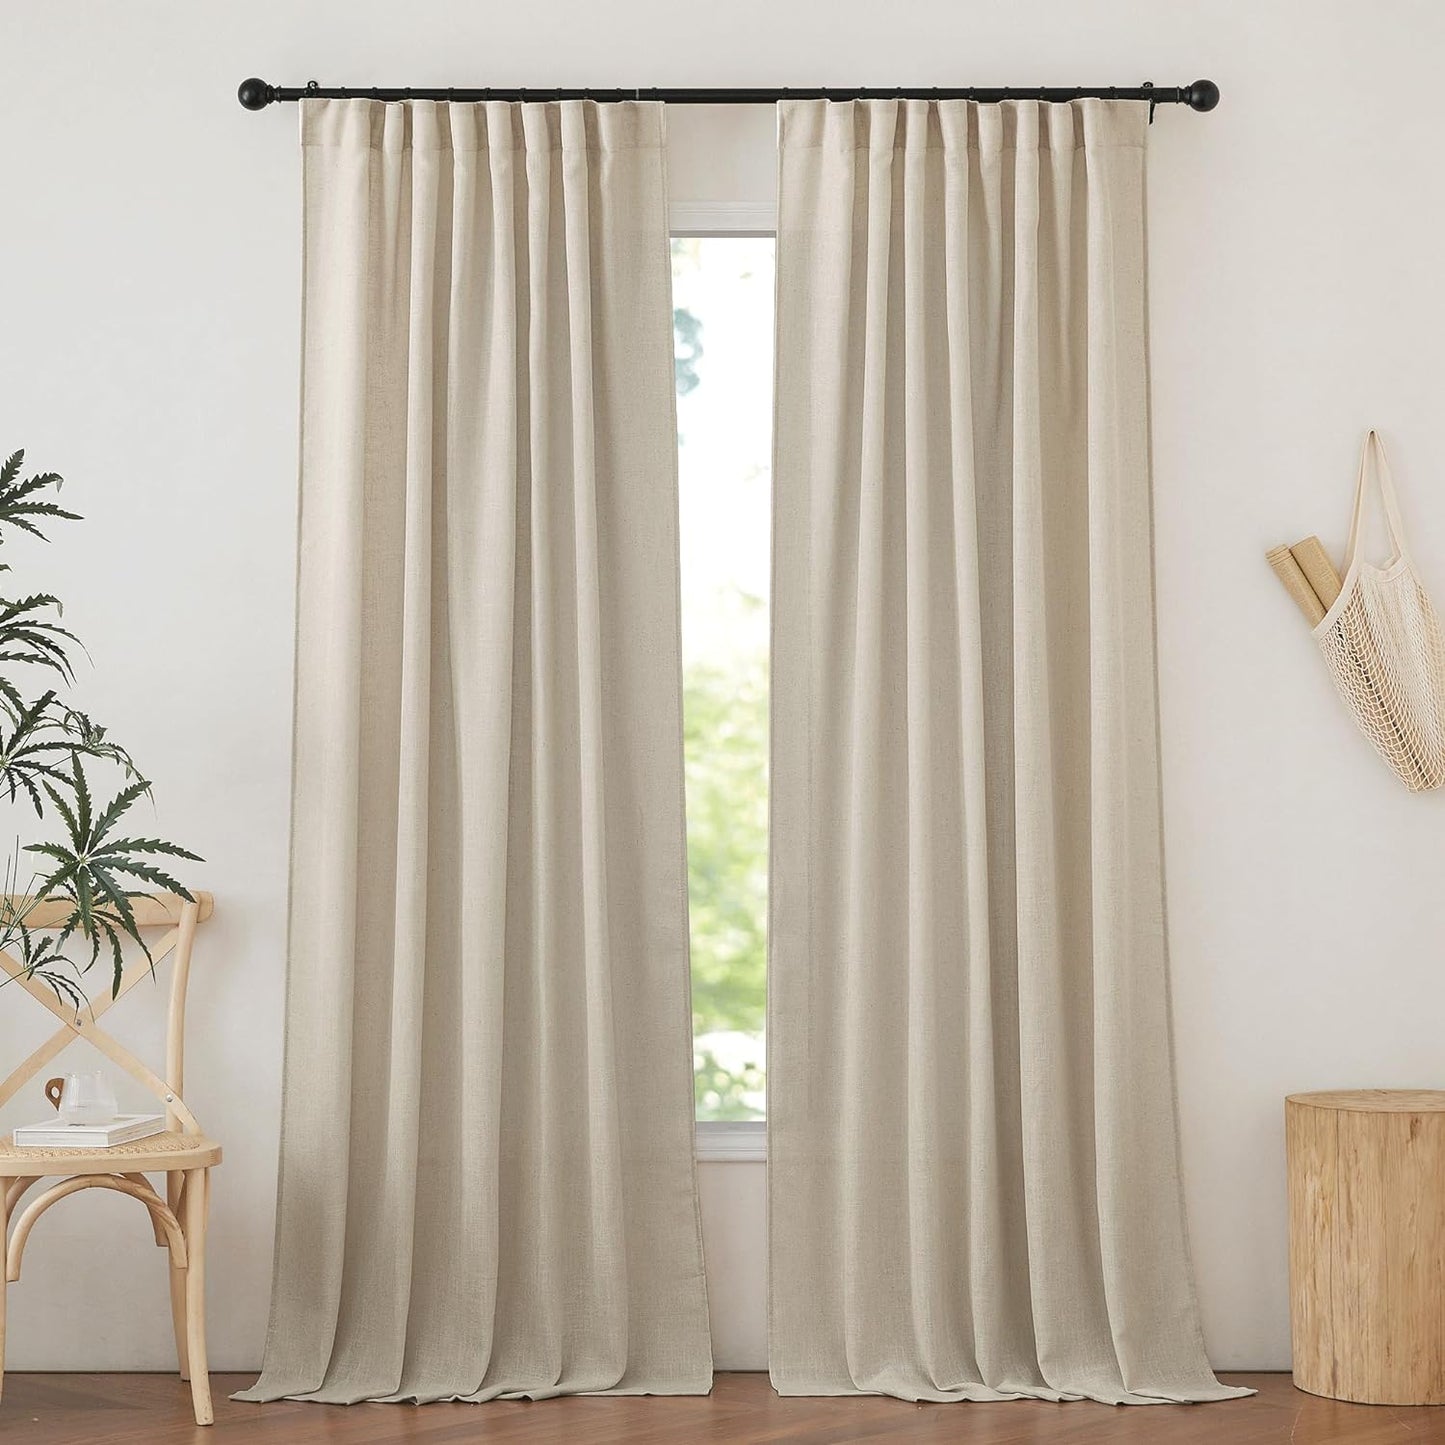 NICETOWN White Curtains Sheer - Semi Sheer Window Covering, Light & Airy Privacy Rod Pocket Back Tab Pinche Pleated Drapes for Bedroom Living Room Patio Glass Door, 52 X 63 Inches Long, Set of 2  NICETOWN Taupe W52 X L84 